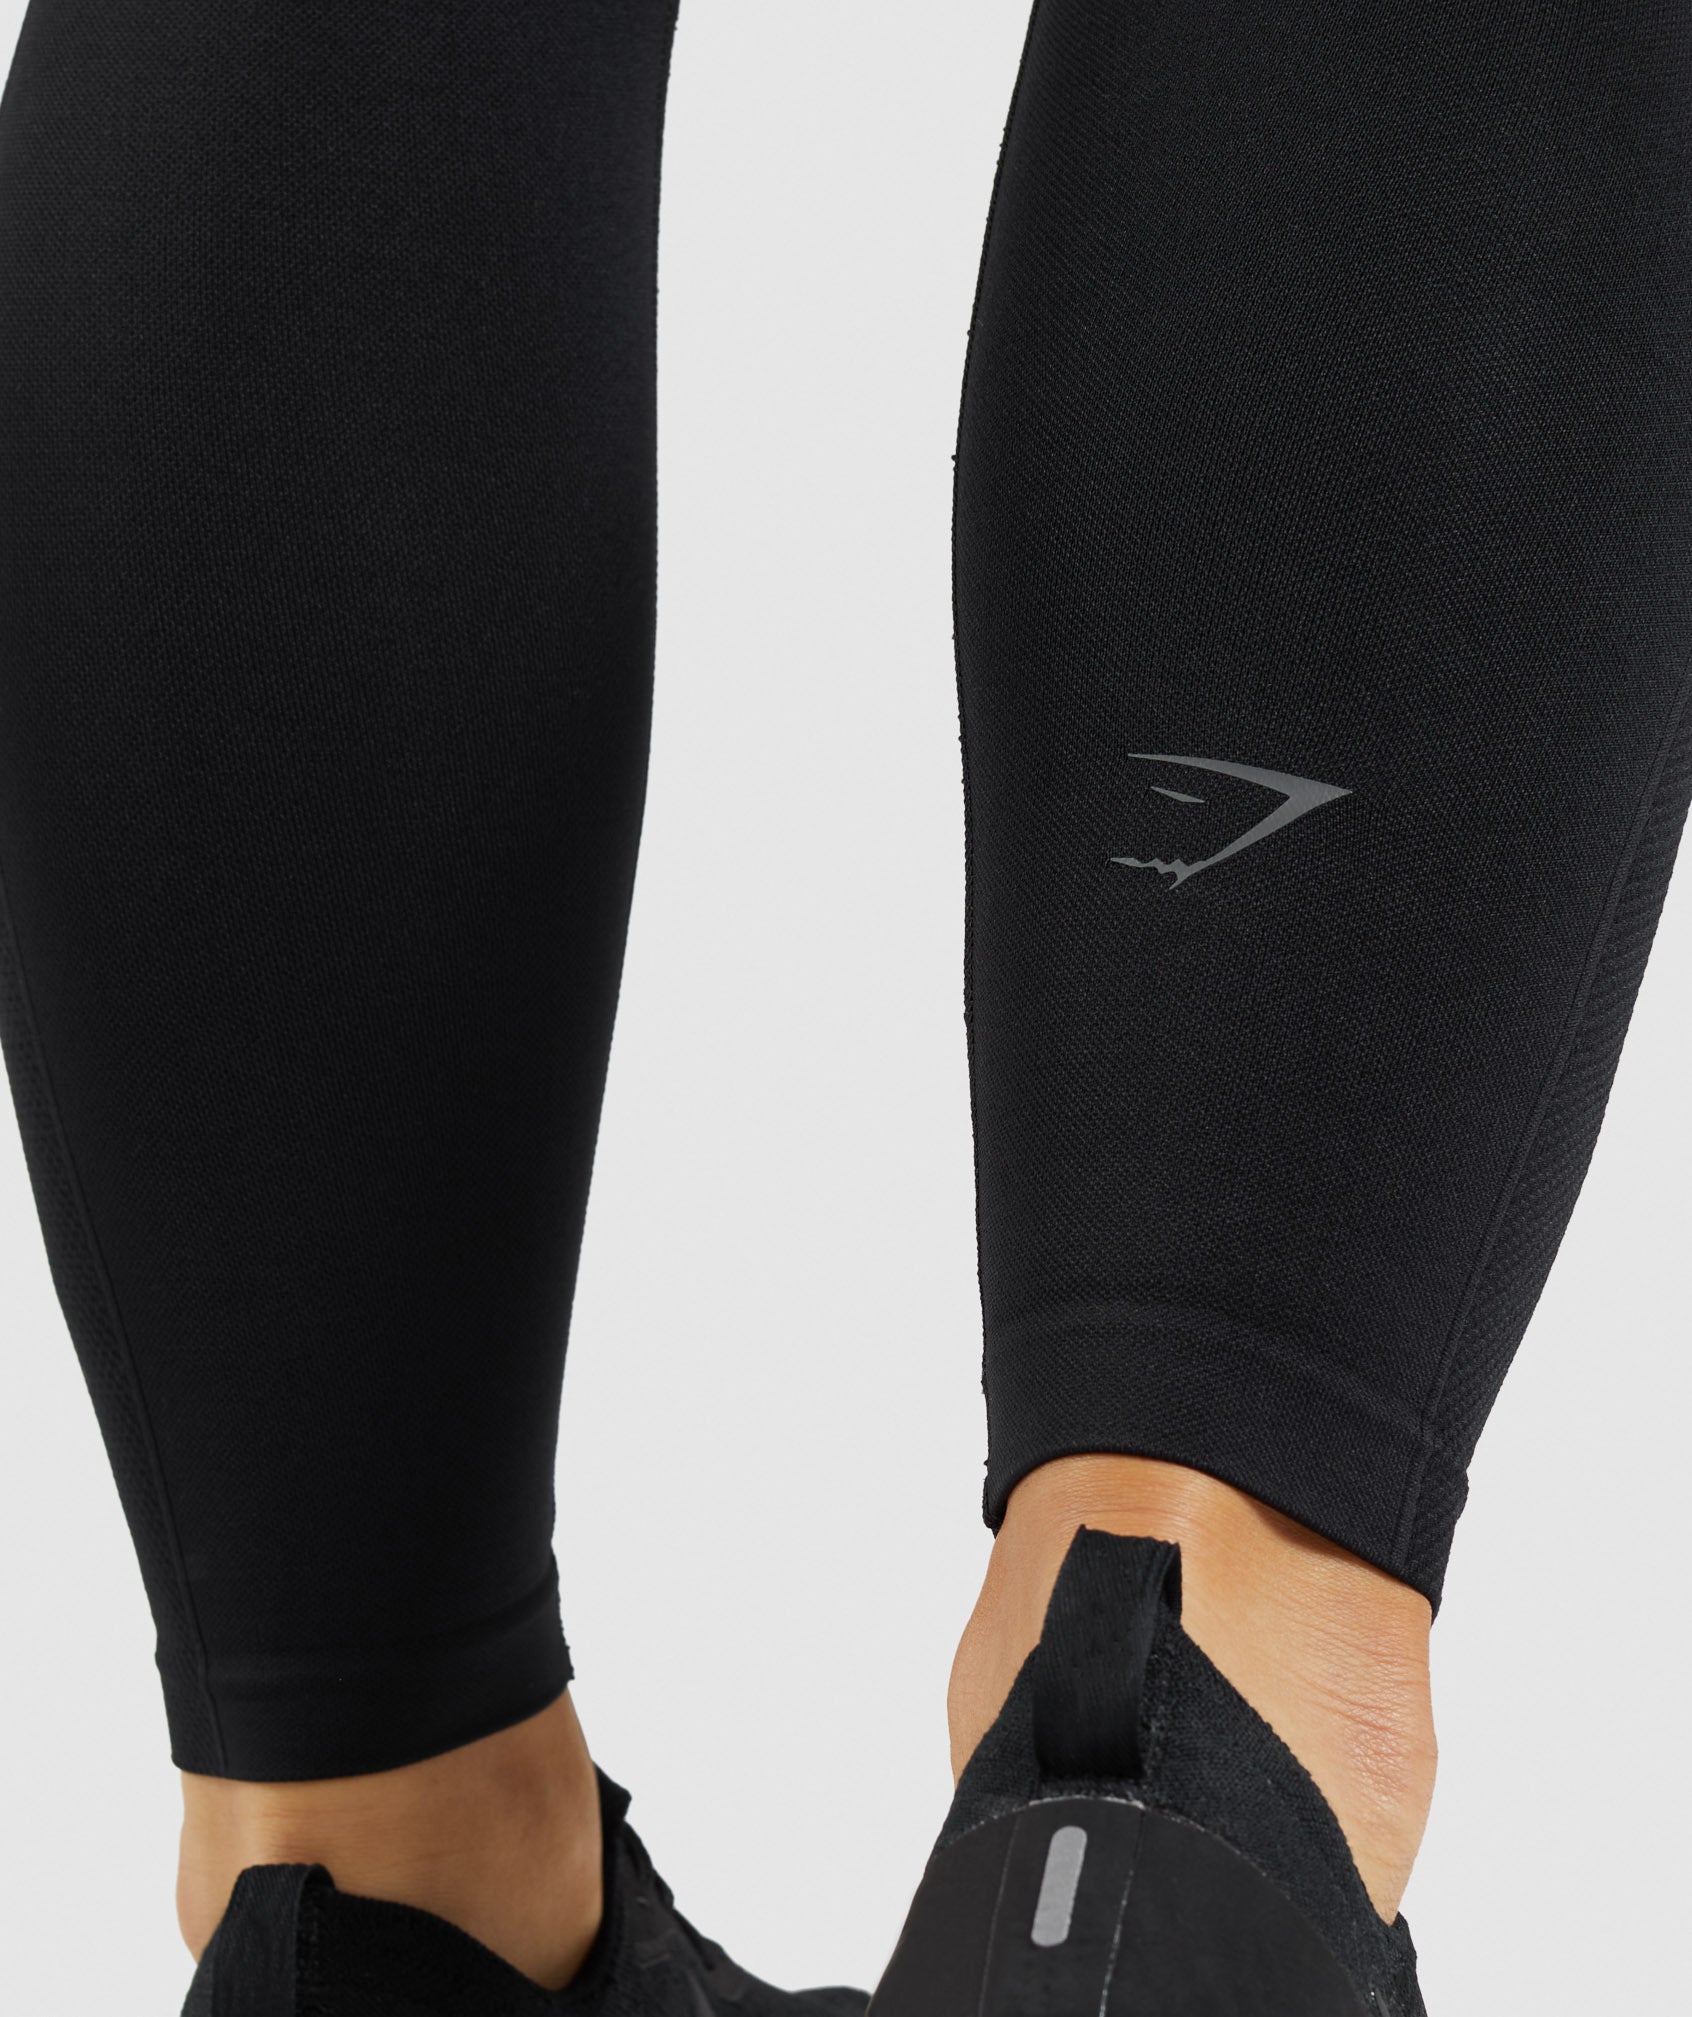 Super Stretchy Workout Leggings For Women | International Society of  Precision Agriculture